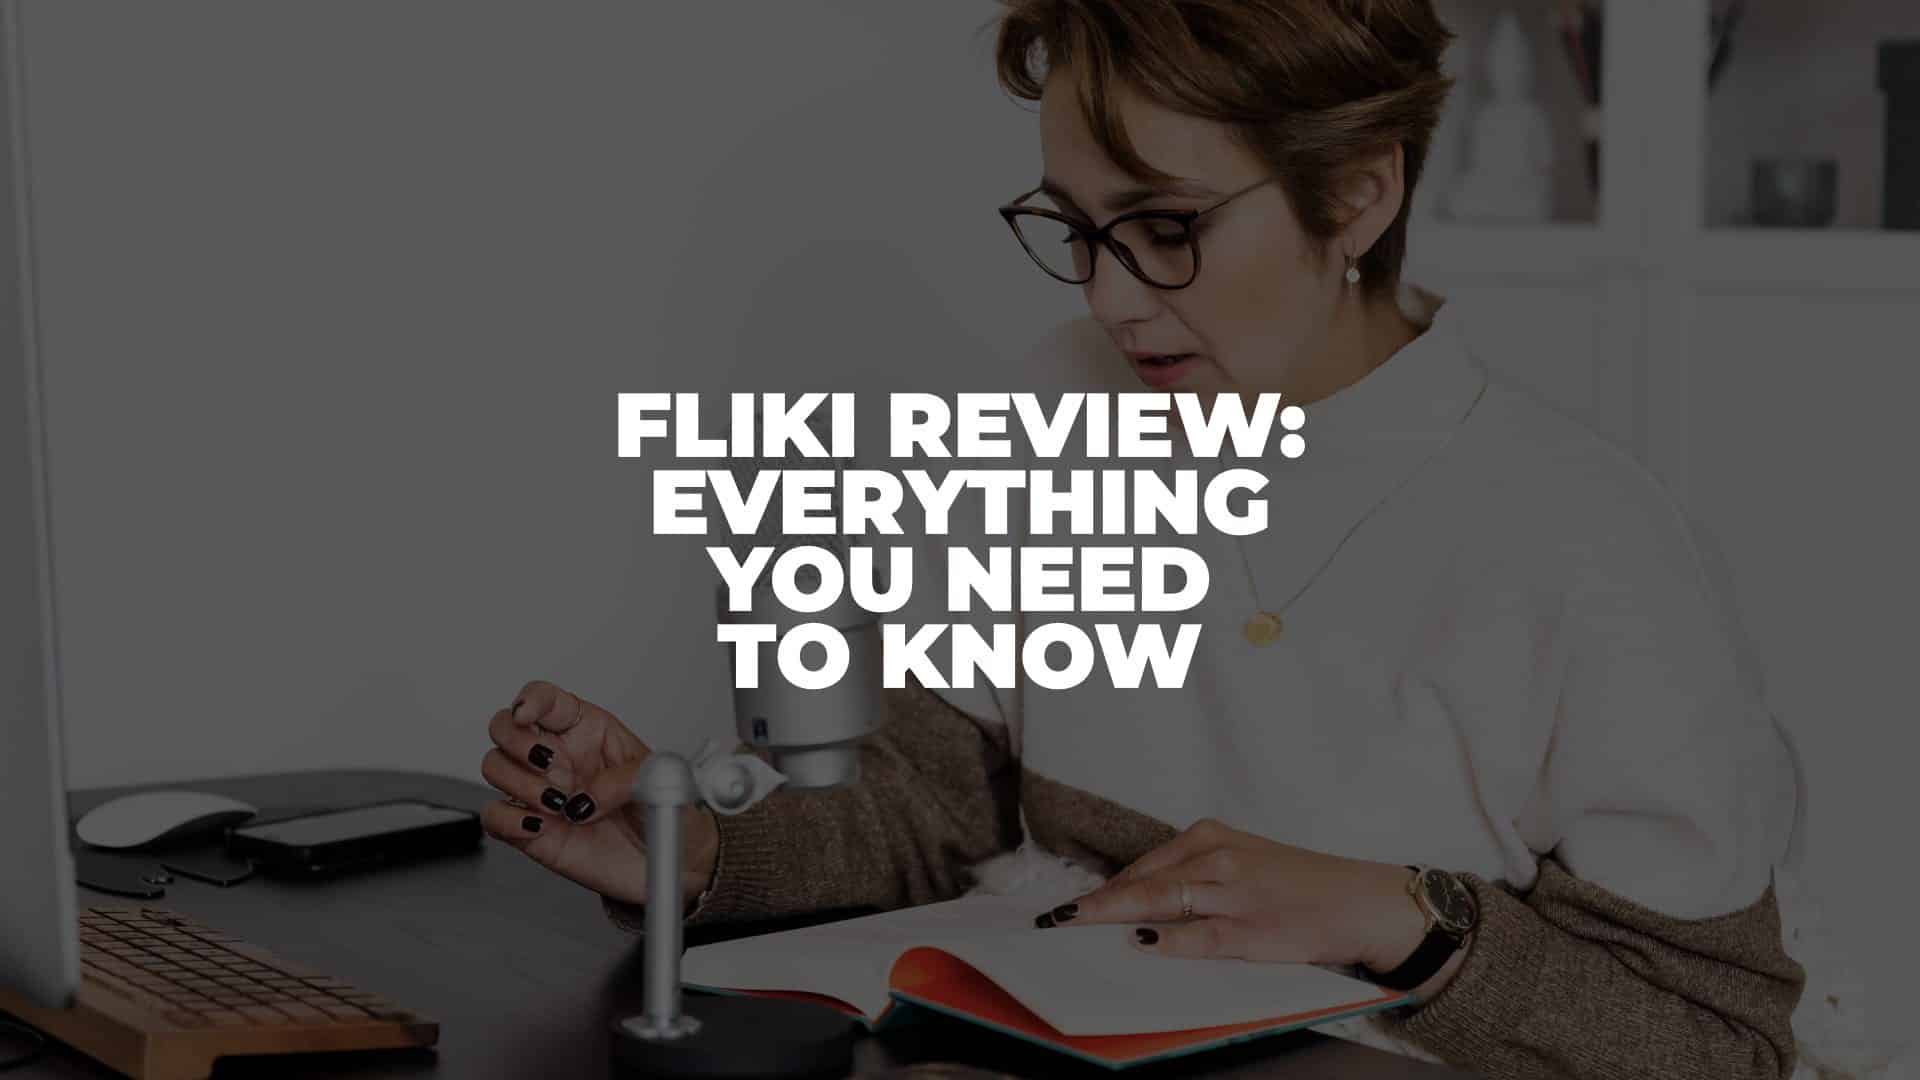 Fliki Review - Featured Image